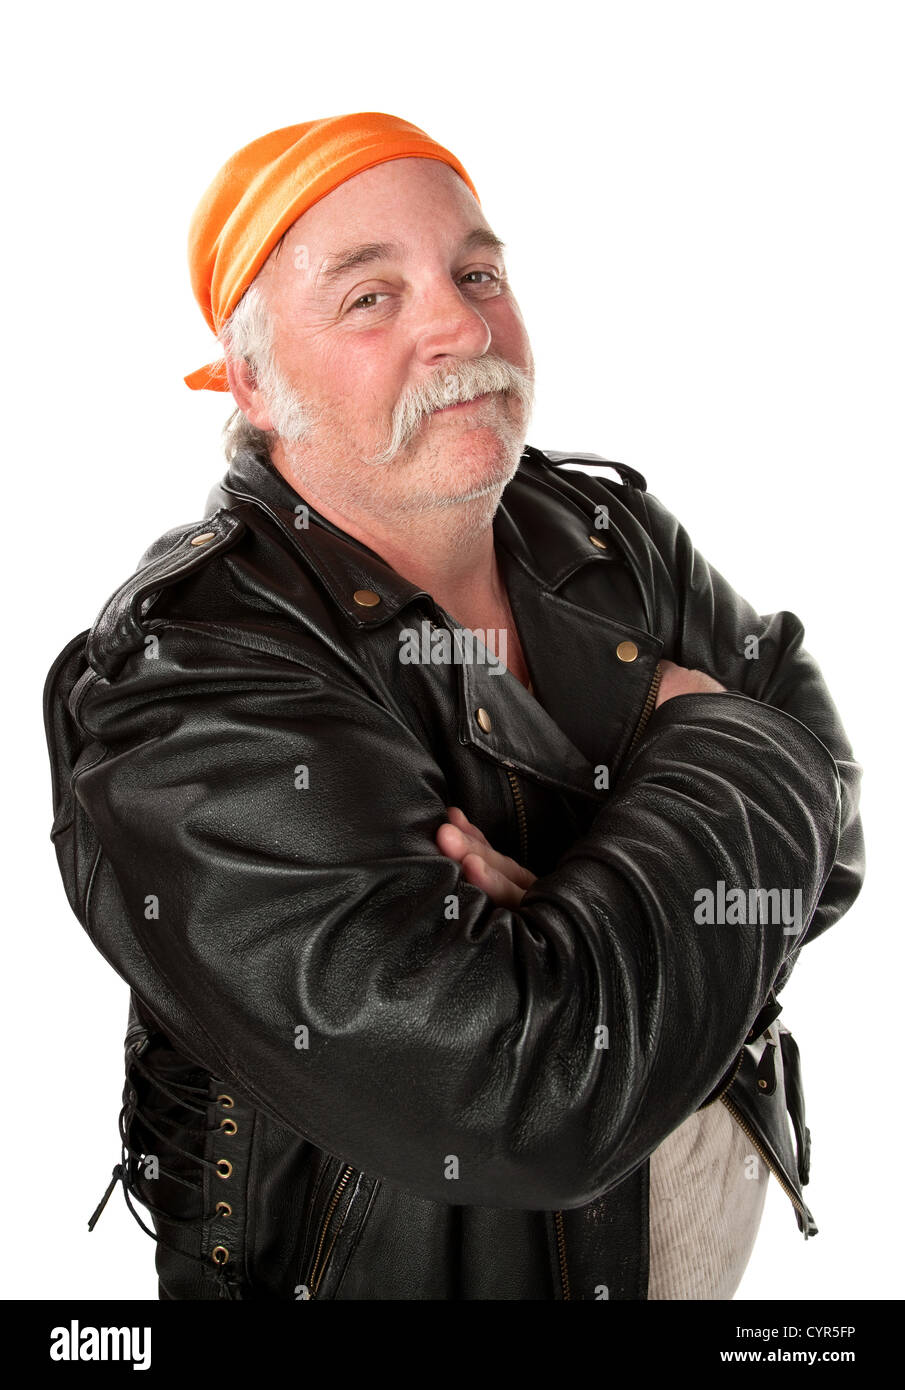 Smiling biker gang member with leather jacket Stock Photo